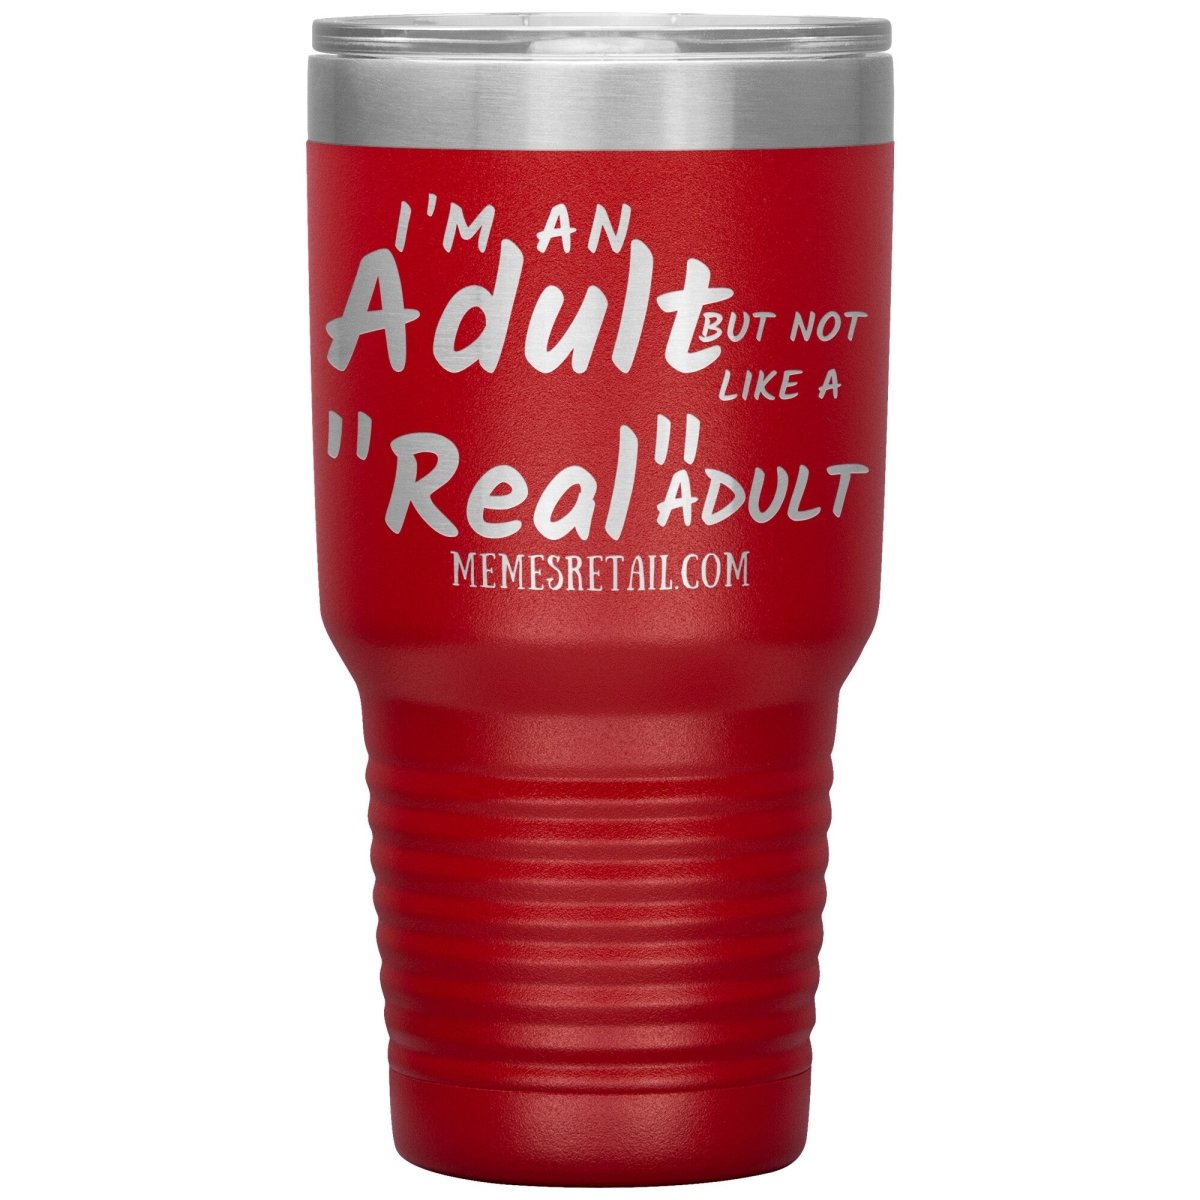 I'm an adult, but not like a "real" adult Tumblers, 30oz Insulated Tumbler / Red - MemesRetail.com